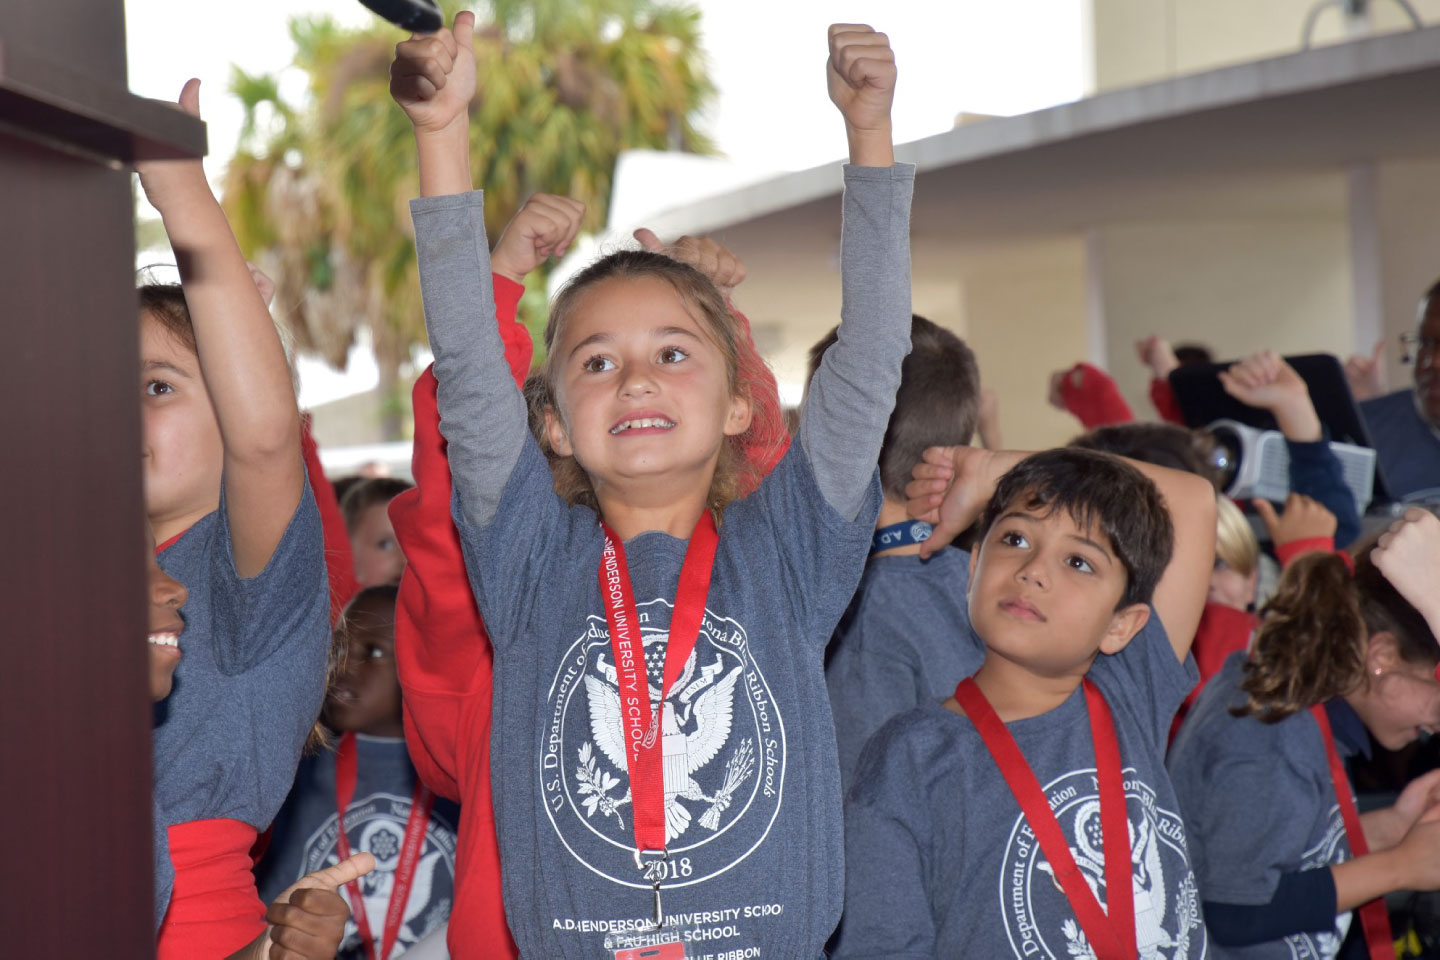 Student cheering during school-wide Blue Ribbon celebration (Photo by Teresa Crane)